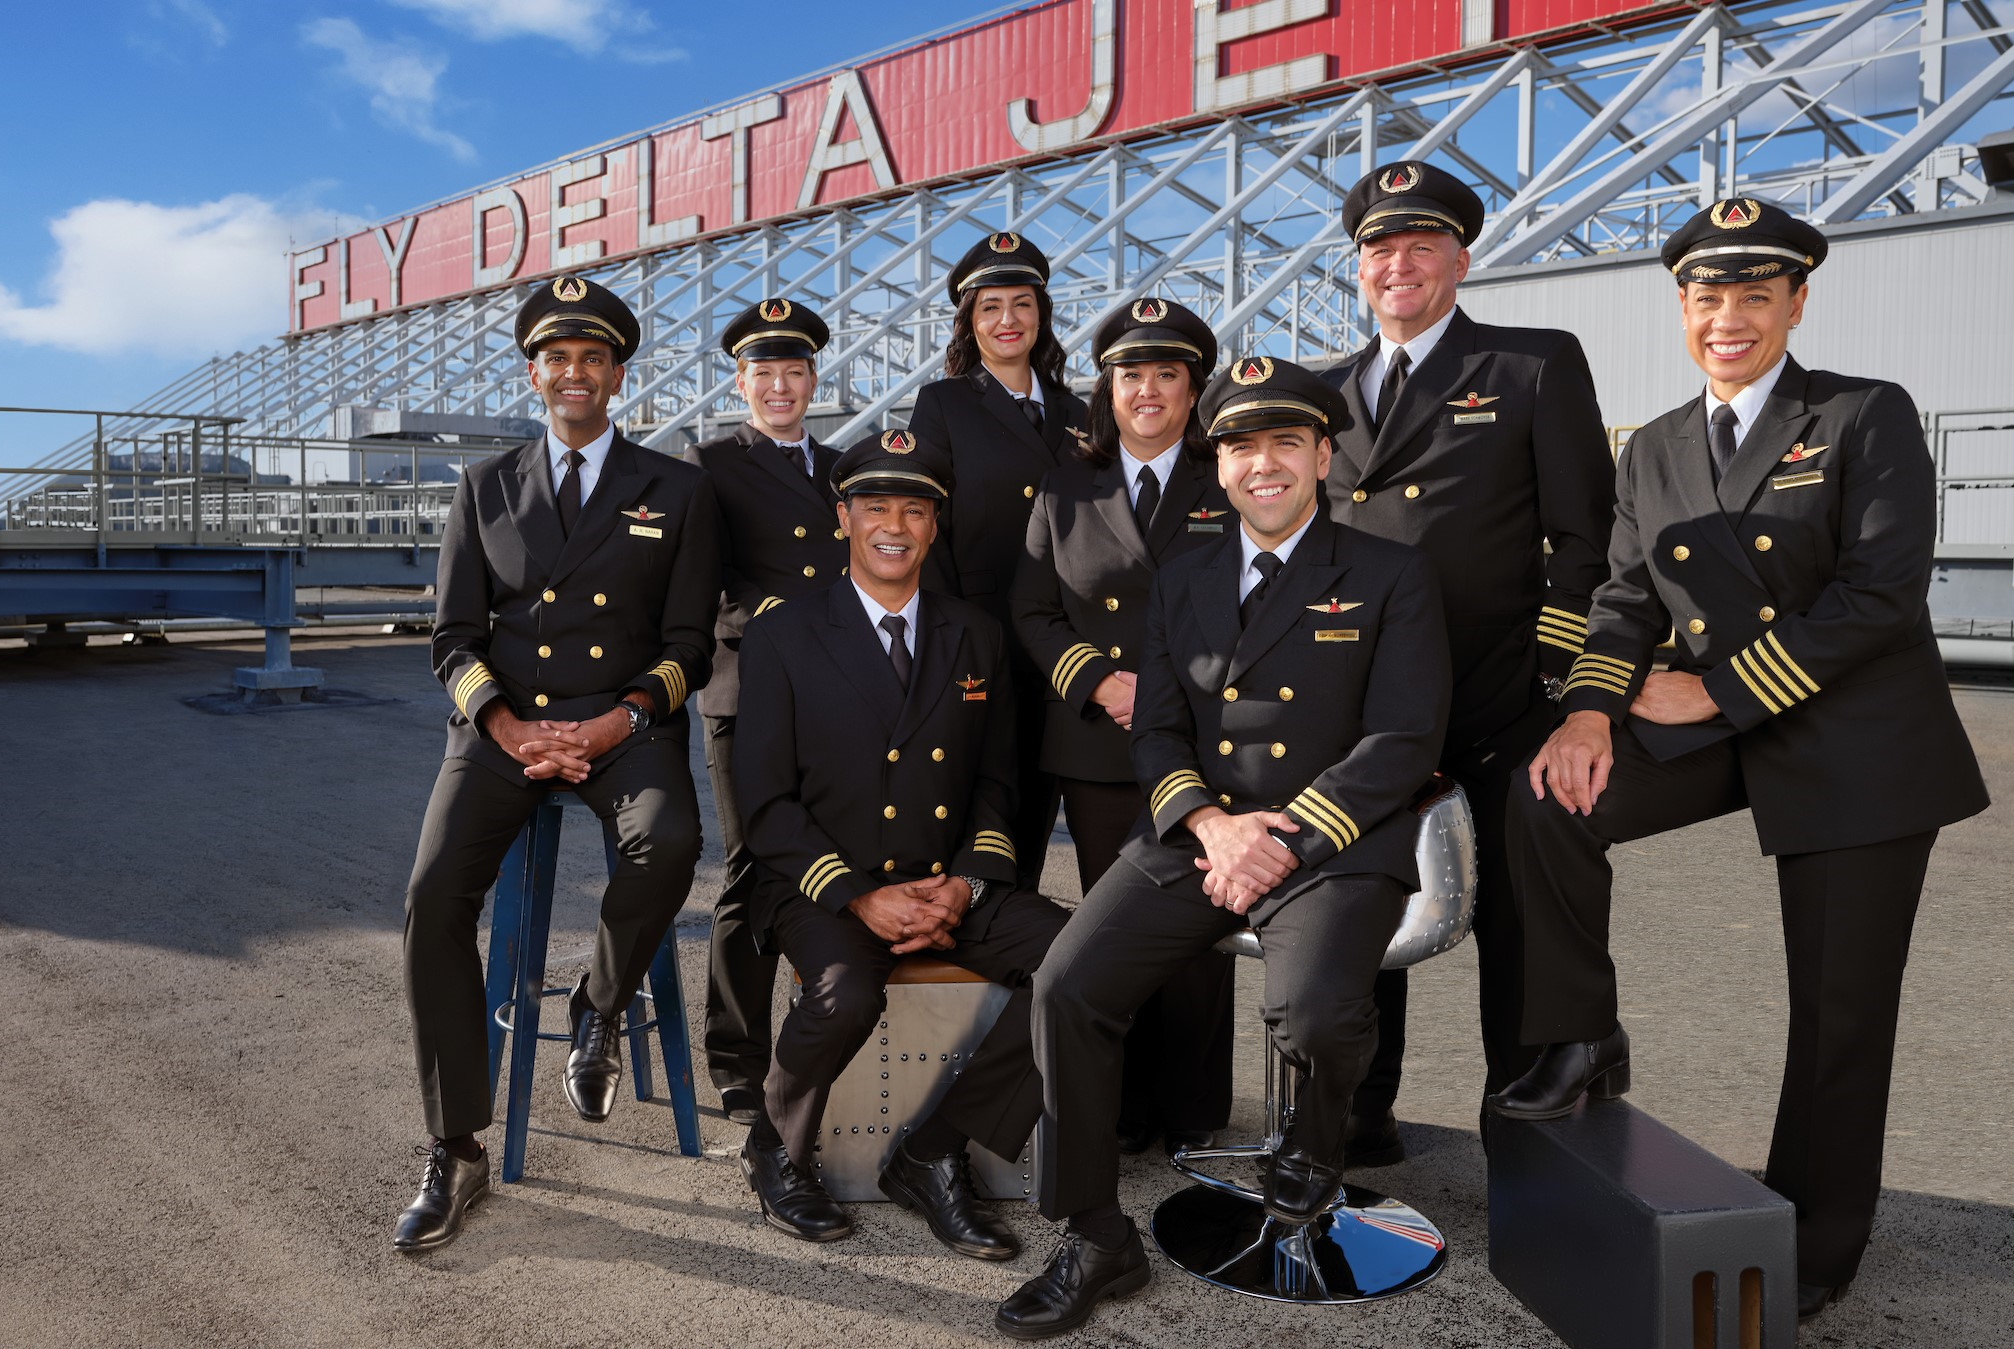 A GROUPING OF MALE AND FEMALE DELTA PILOTS SIT UNDER A SIGN THAT SAYS FLY DELTA JET, ON AN AIRPORT TARMAC